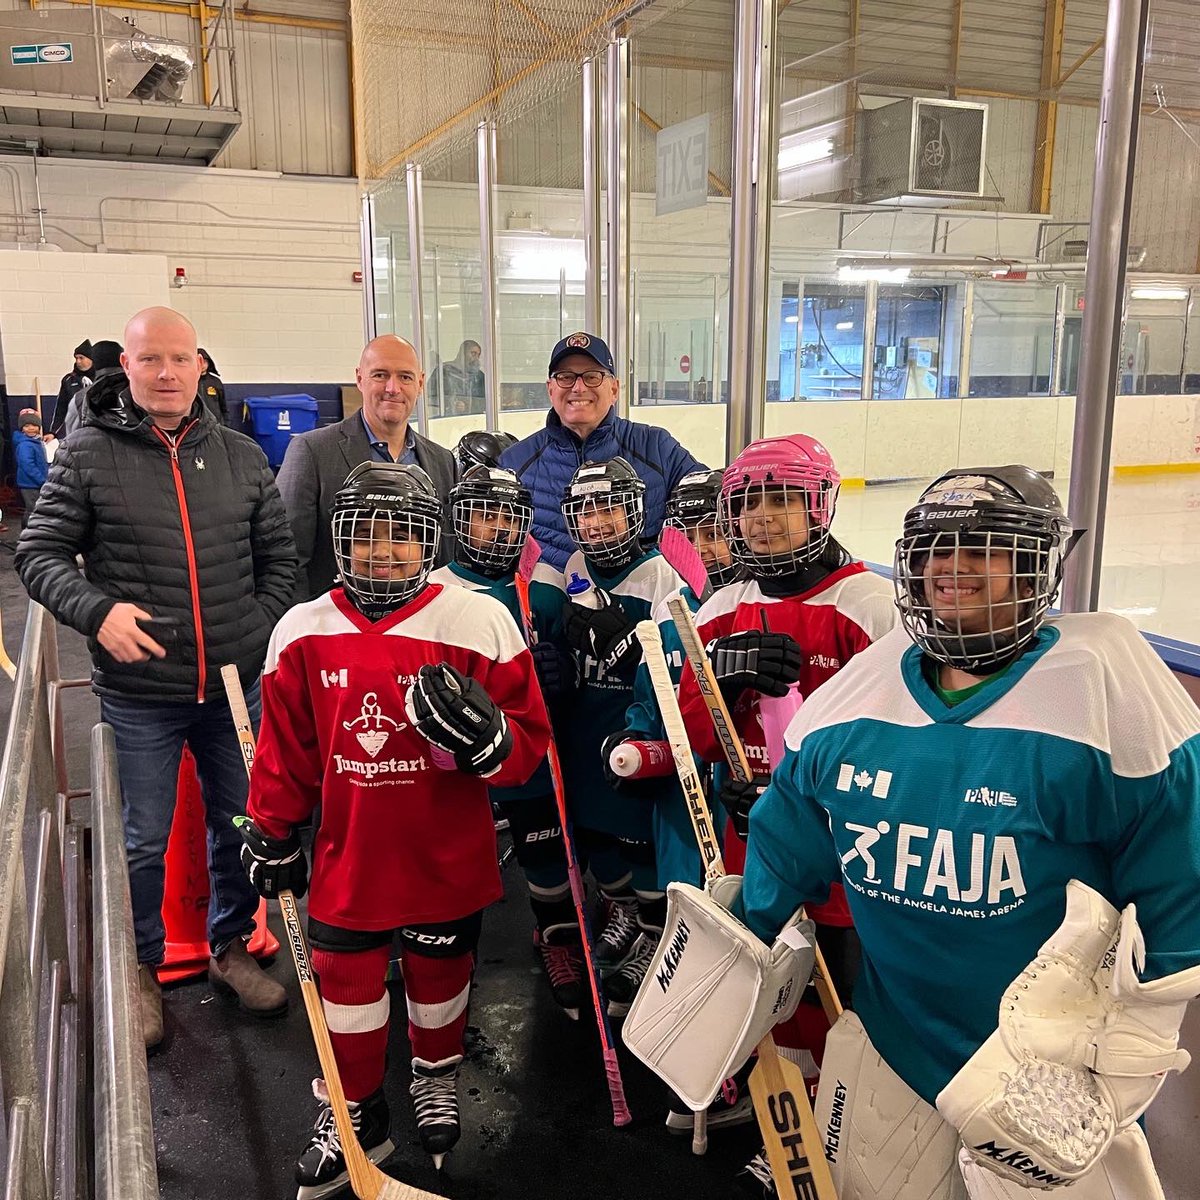 Thank you to our TPA members for participating in this fantastic community program! @ProActionHockey @pahlflemingdon @COPSandKIDSca